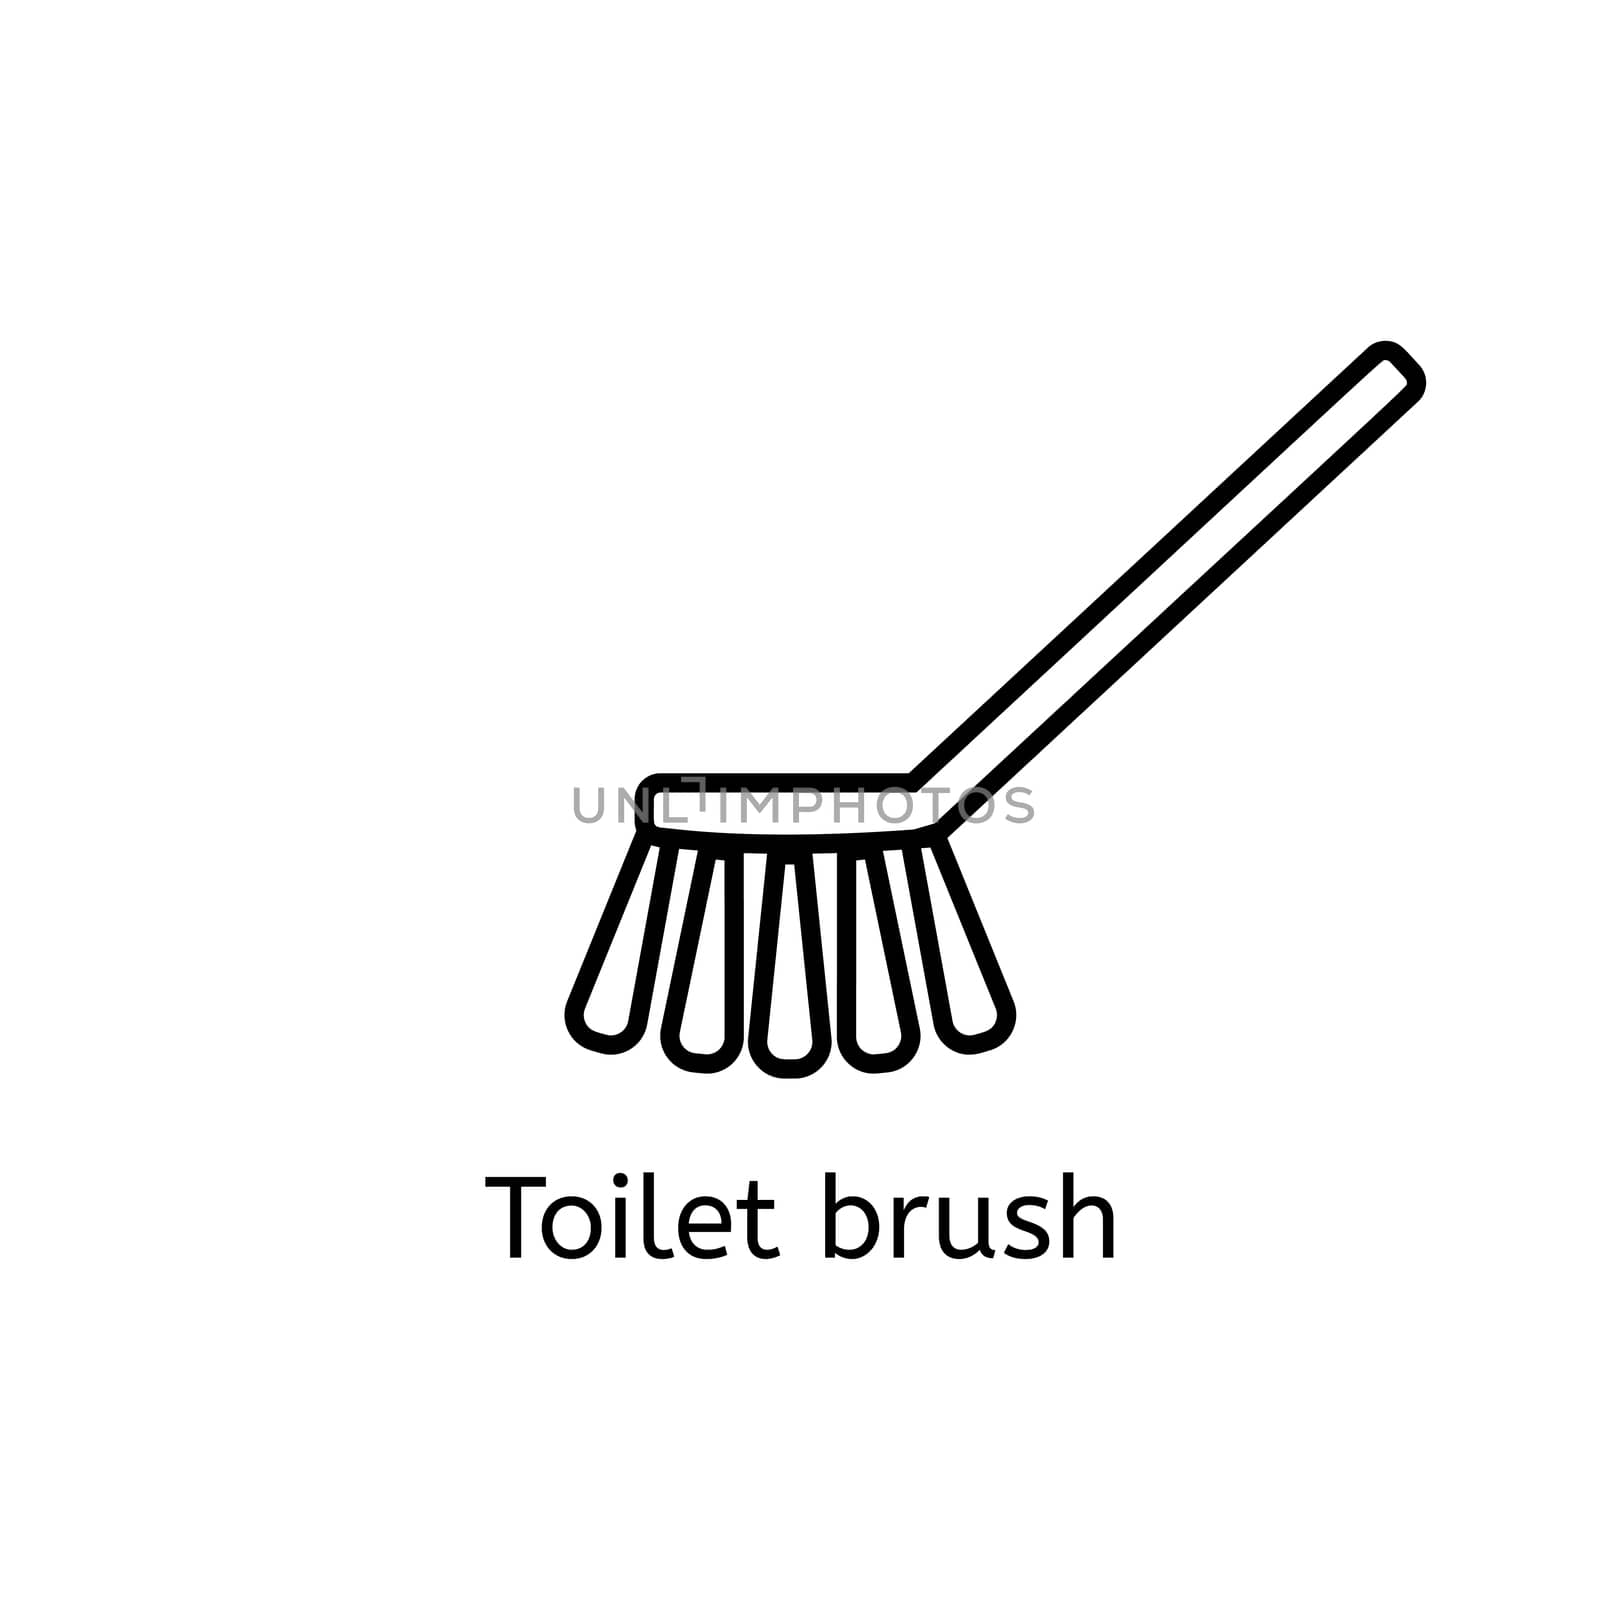 Toilet brush simple line icon. Washing brush thin linear signs. Bathroom cleaning simple concept for websites, infographic, mobile applications. by Elena_Garder